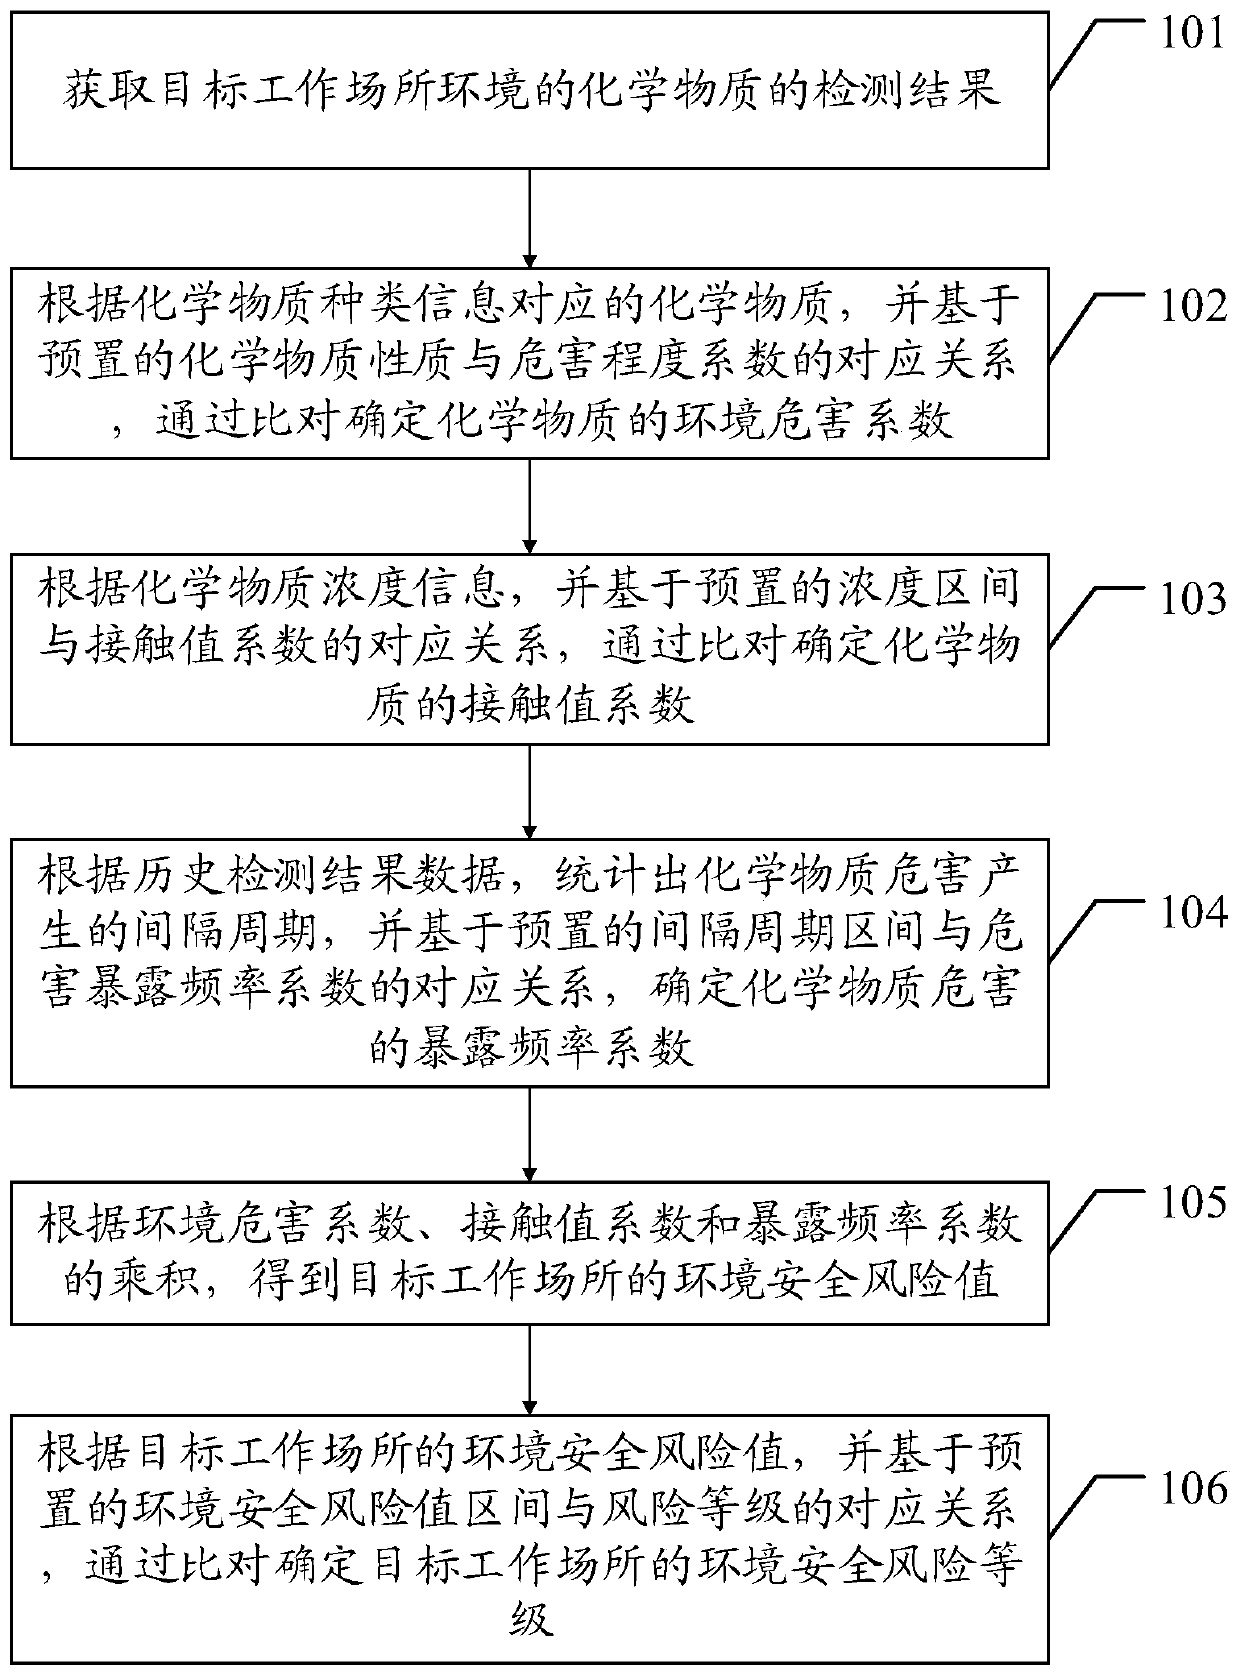 Fixed-point operation post working environment safety risk assessment method and related equipment